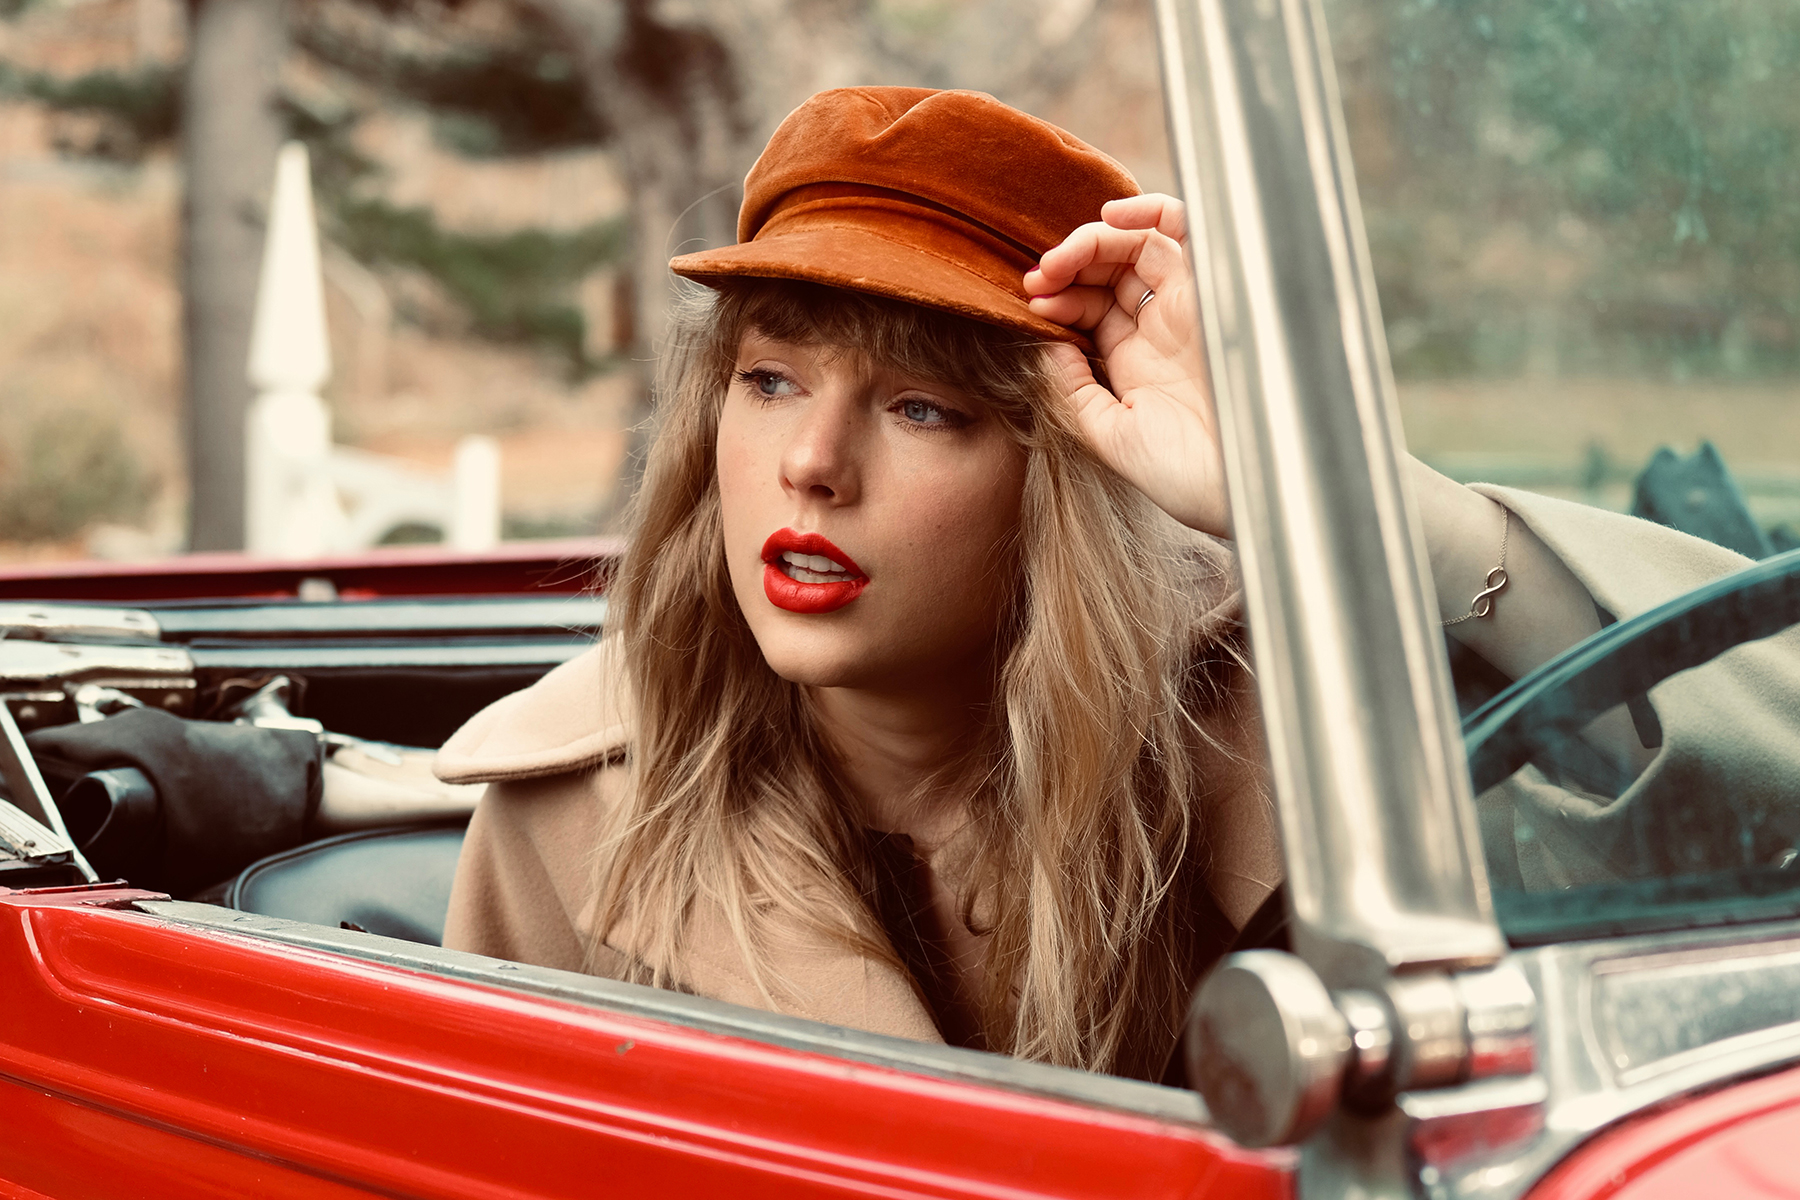 Taylor Swift’s 10-Minute All Too Well’ becomes the longest-running number one hit